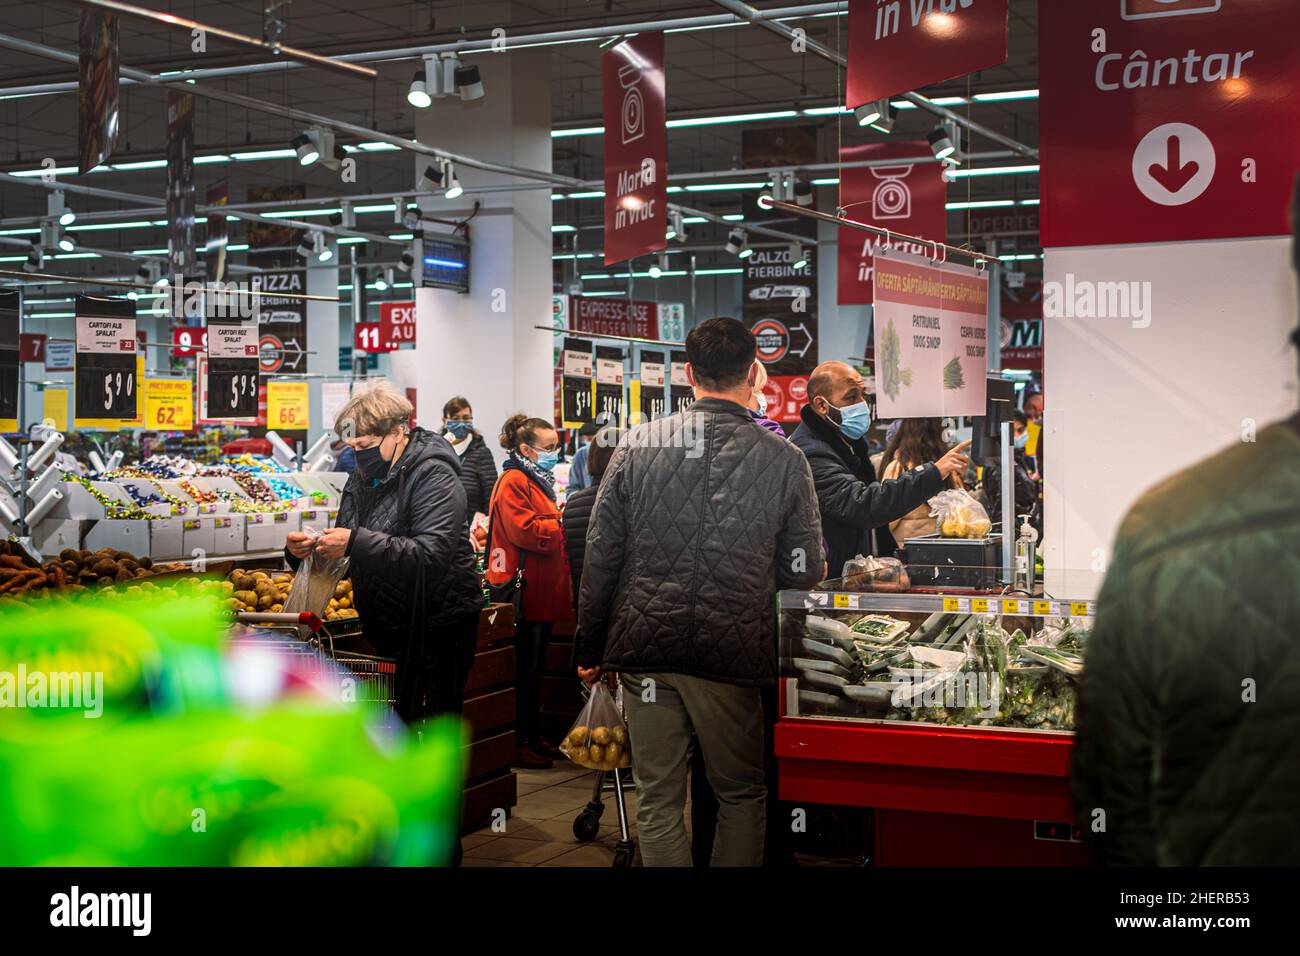 Chisinau, Moldova - October 17, 2021: Inside a supermarket. Men and women wearing medical masks buy vegetables from the self-service section of the Ve Stock Photo